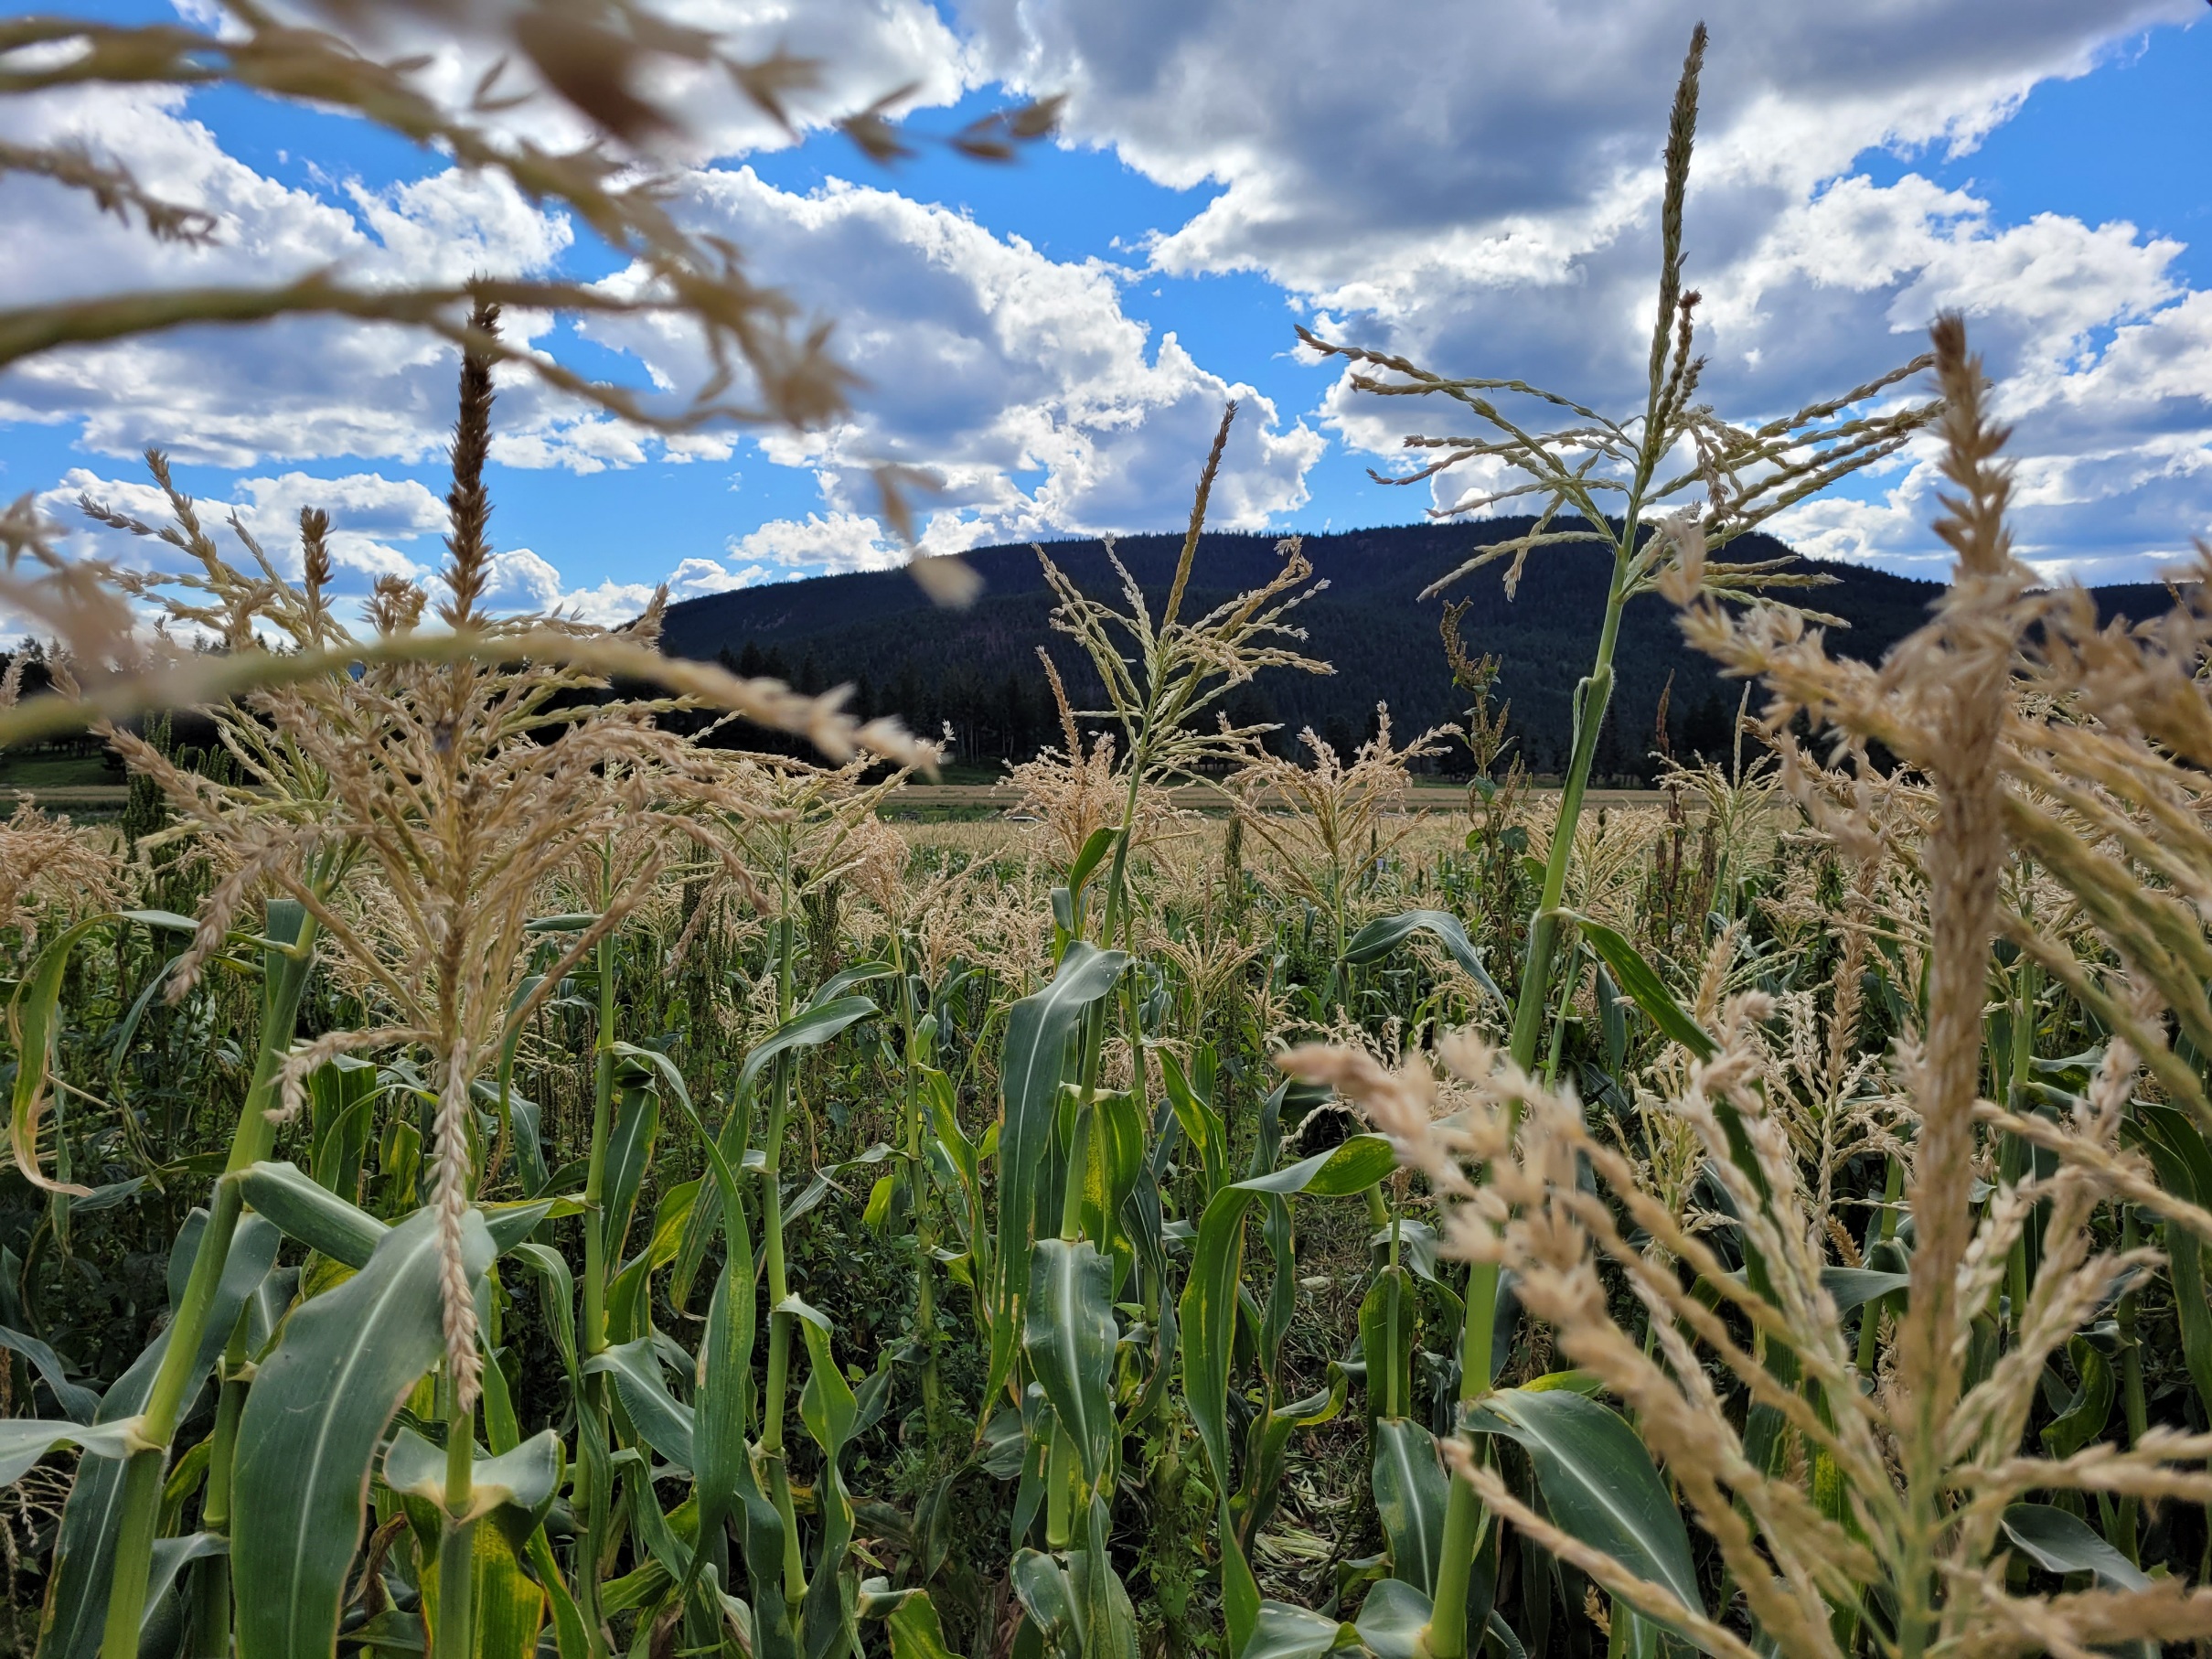 photo of a tall cornfield taking from in the middle of the corn, mountains in the distance and white clouds overhead in a blue sky